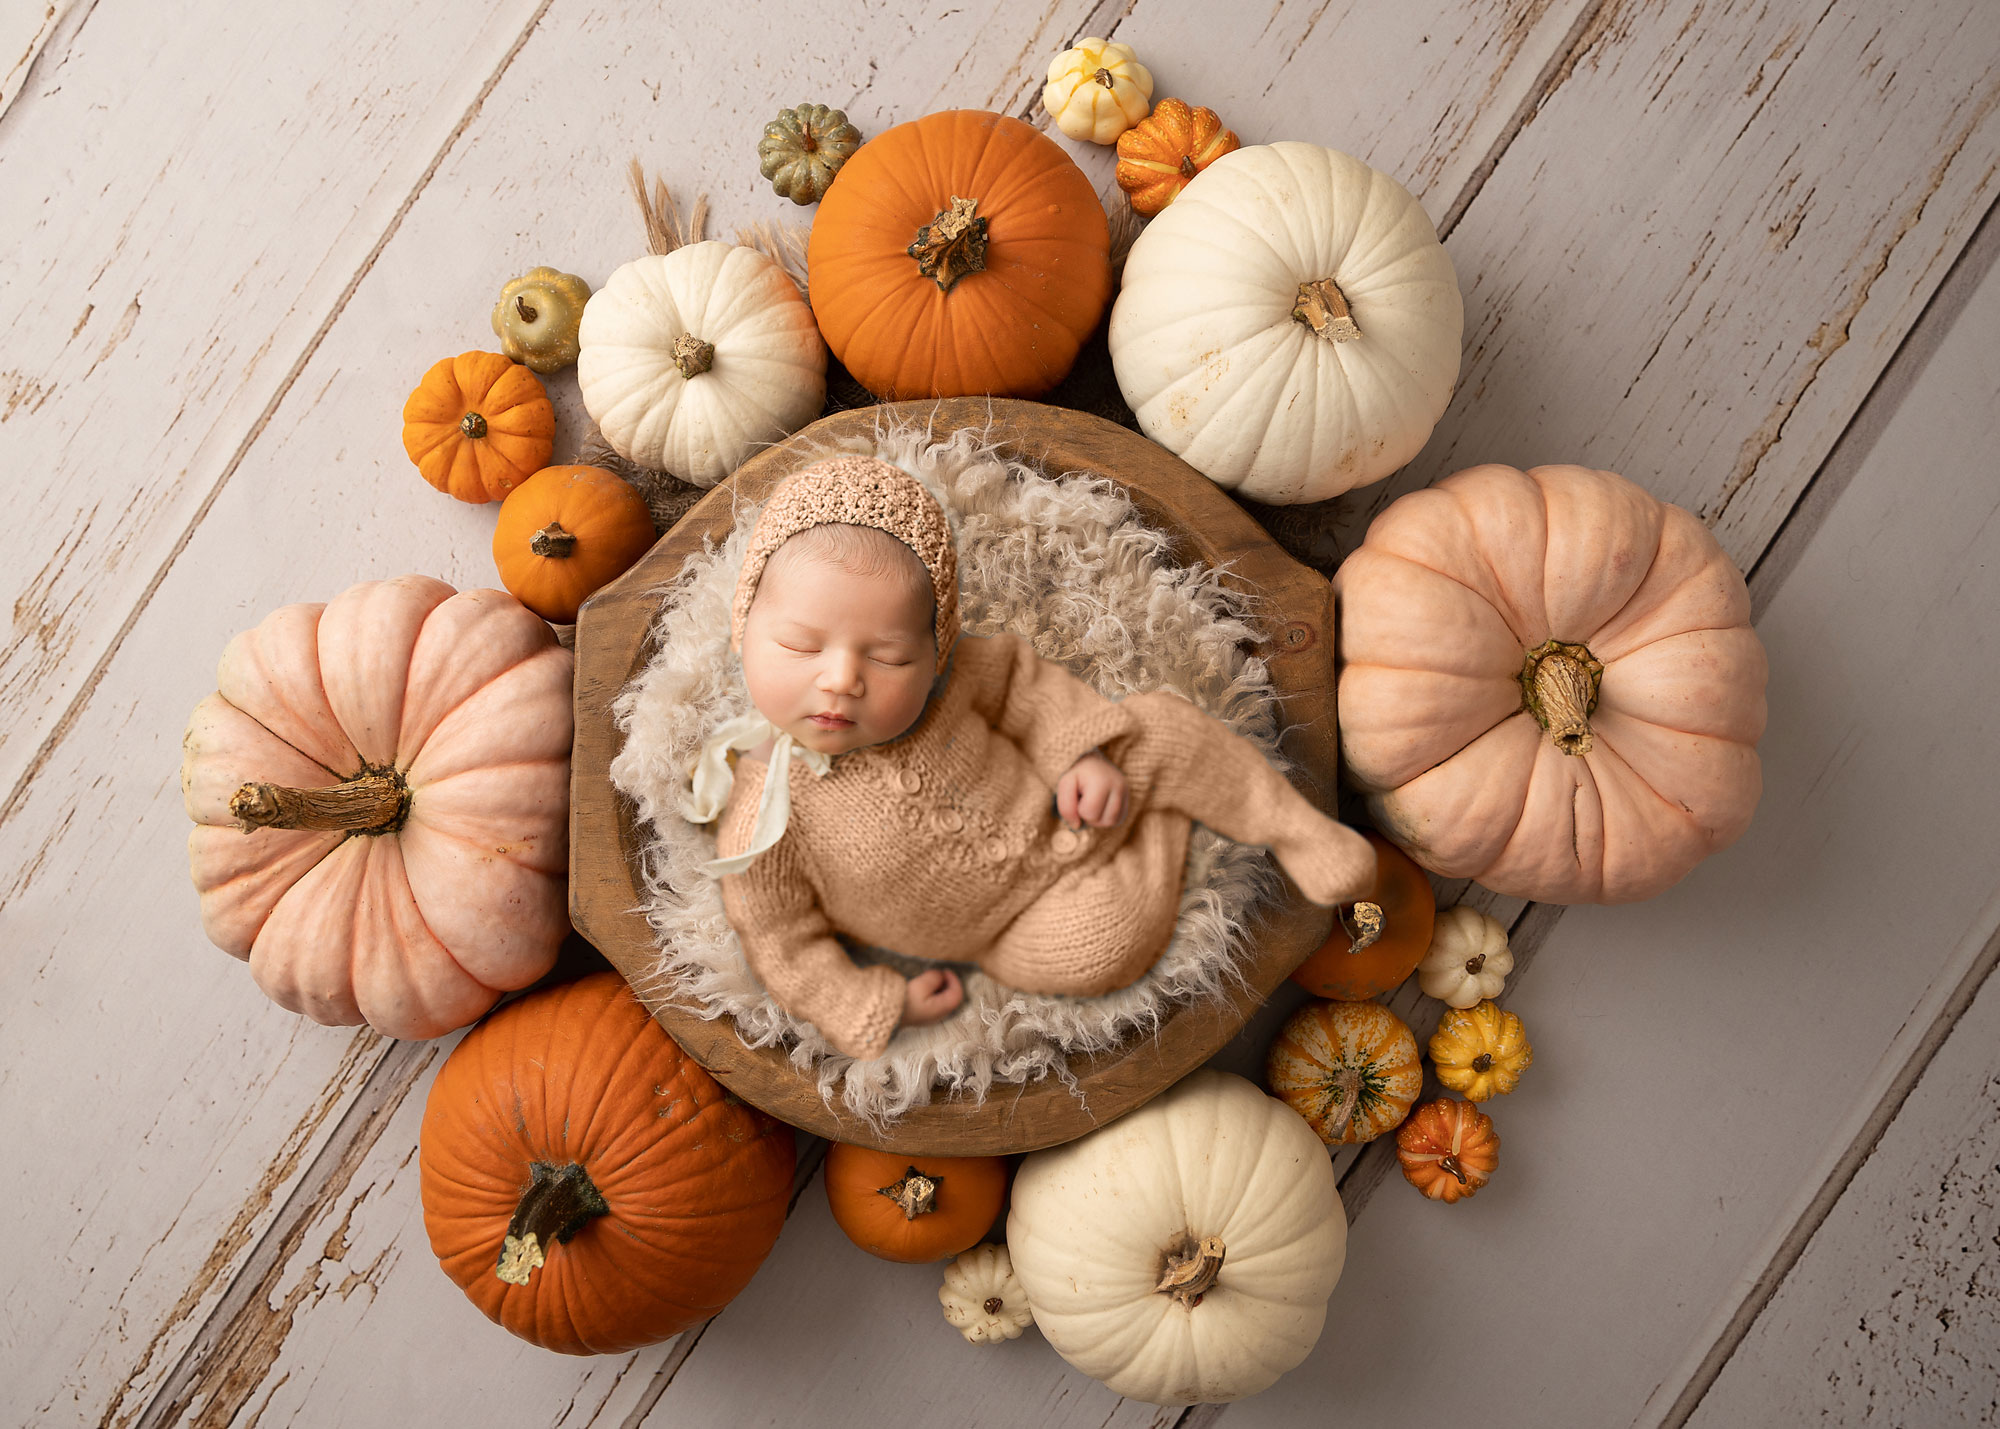 baby girl sleeping in a basket with many pumpkins around 